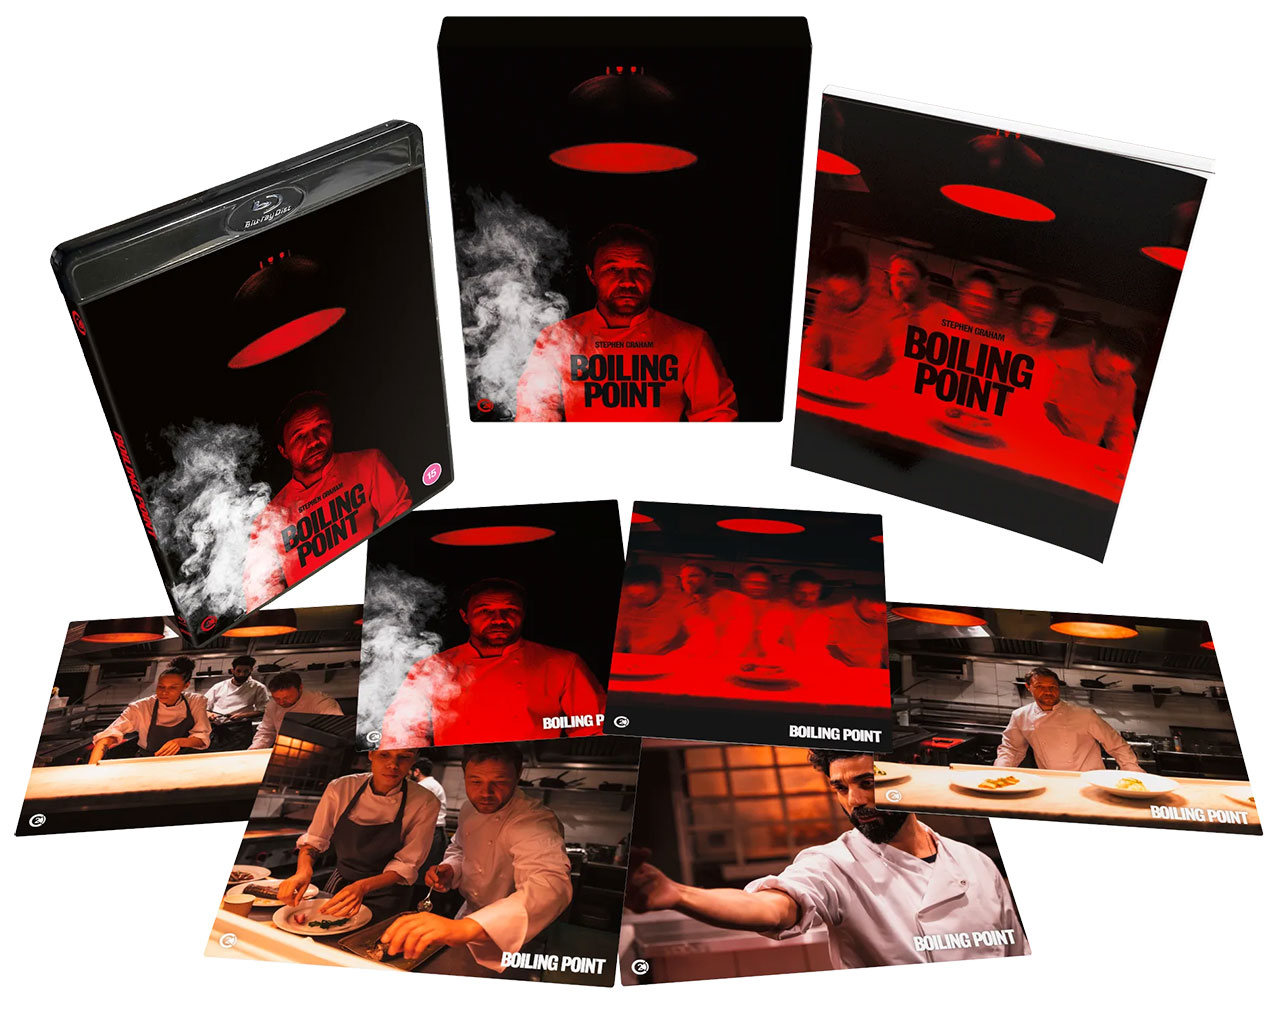 Boiling Point Blu-ray pack shot